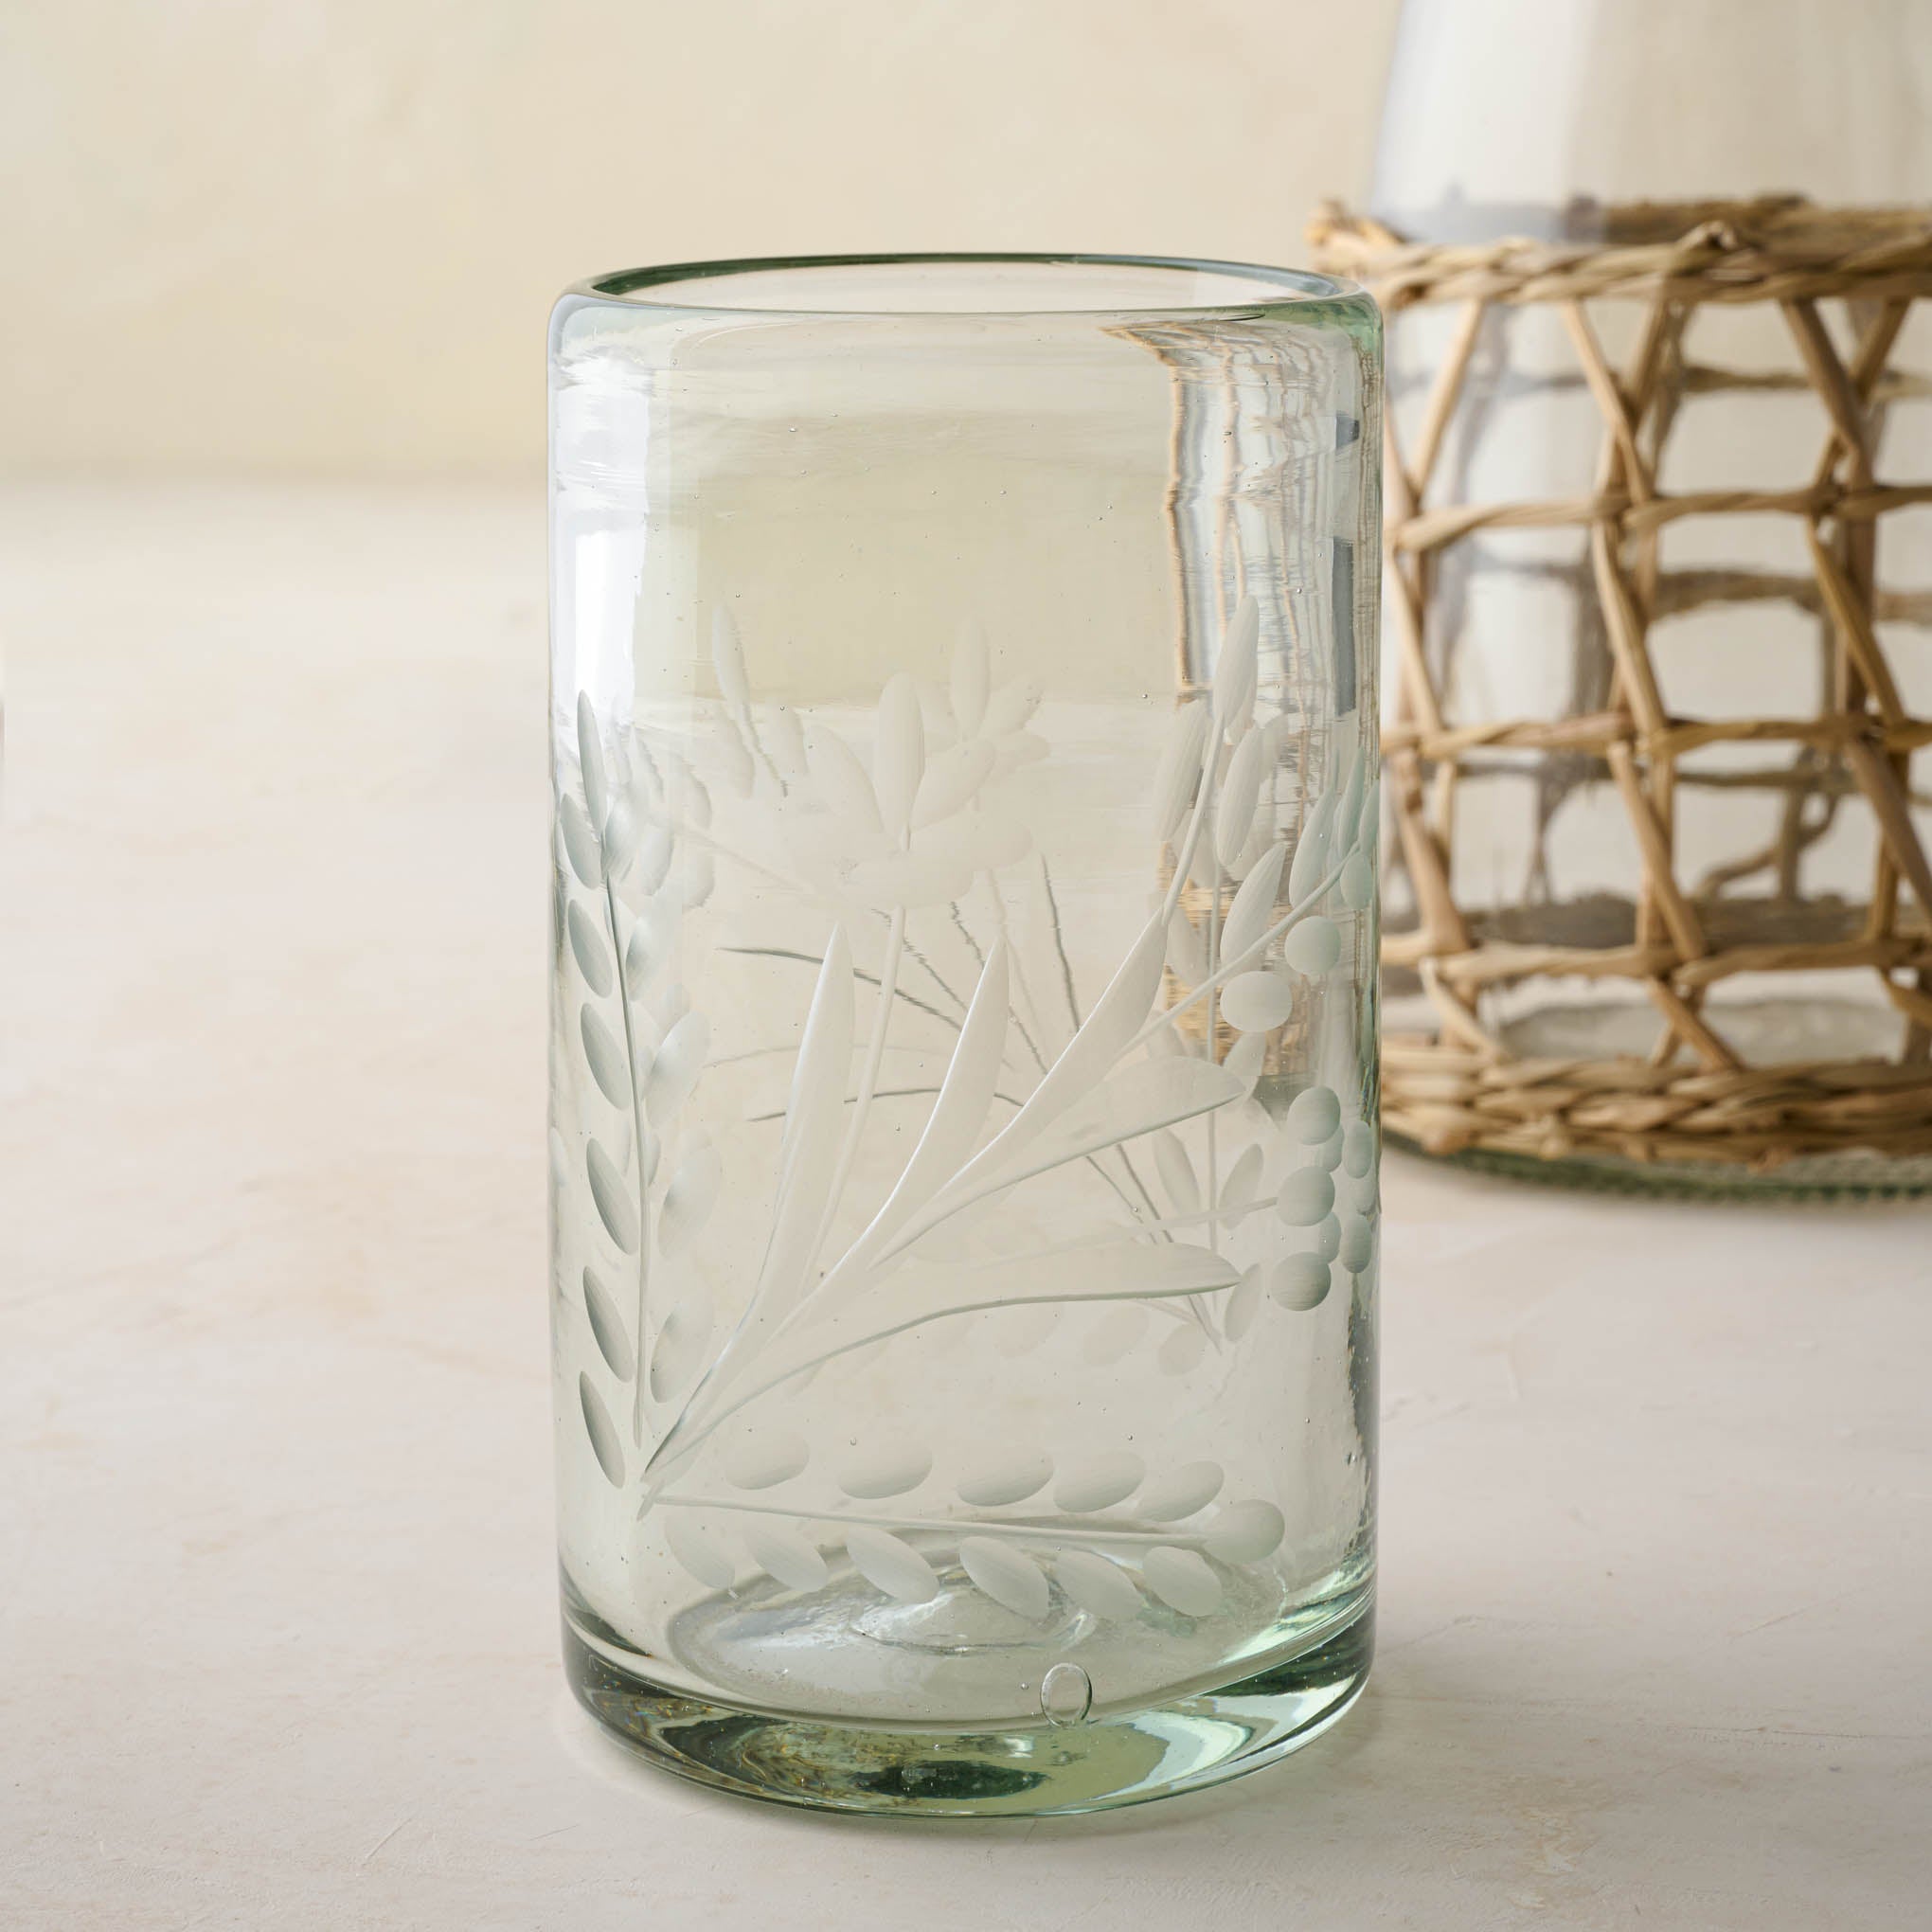 Magnolia Floral Etched Glass Short Items range from $20.00 to $26.00